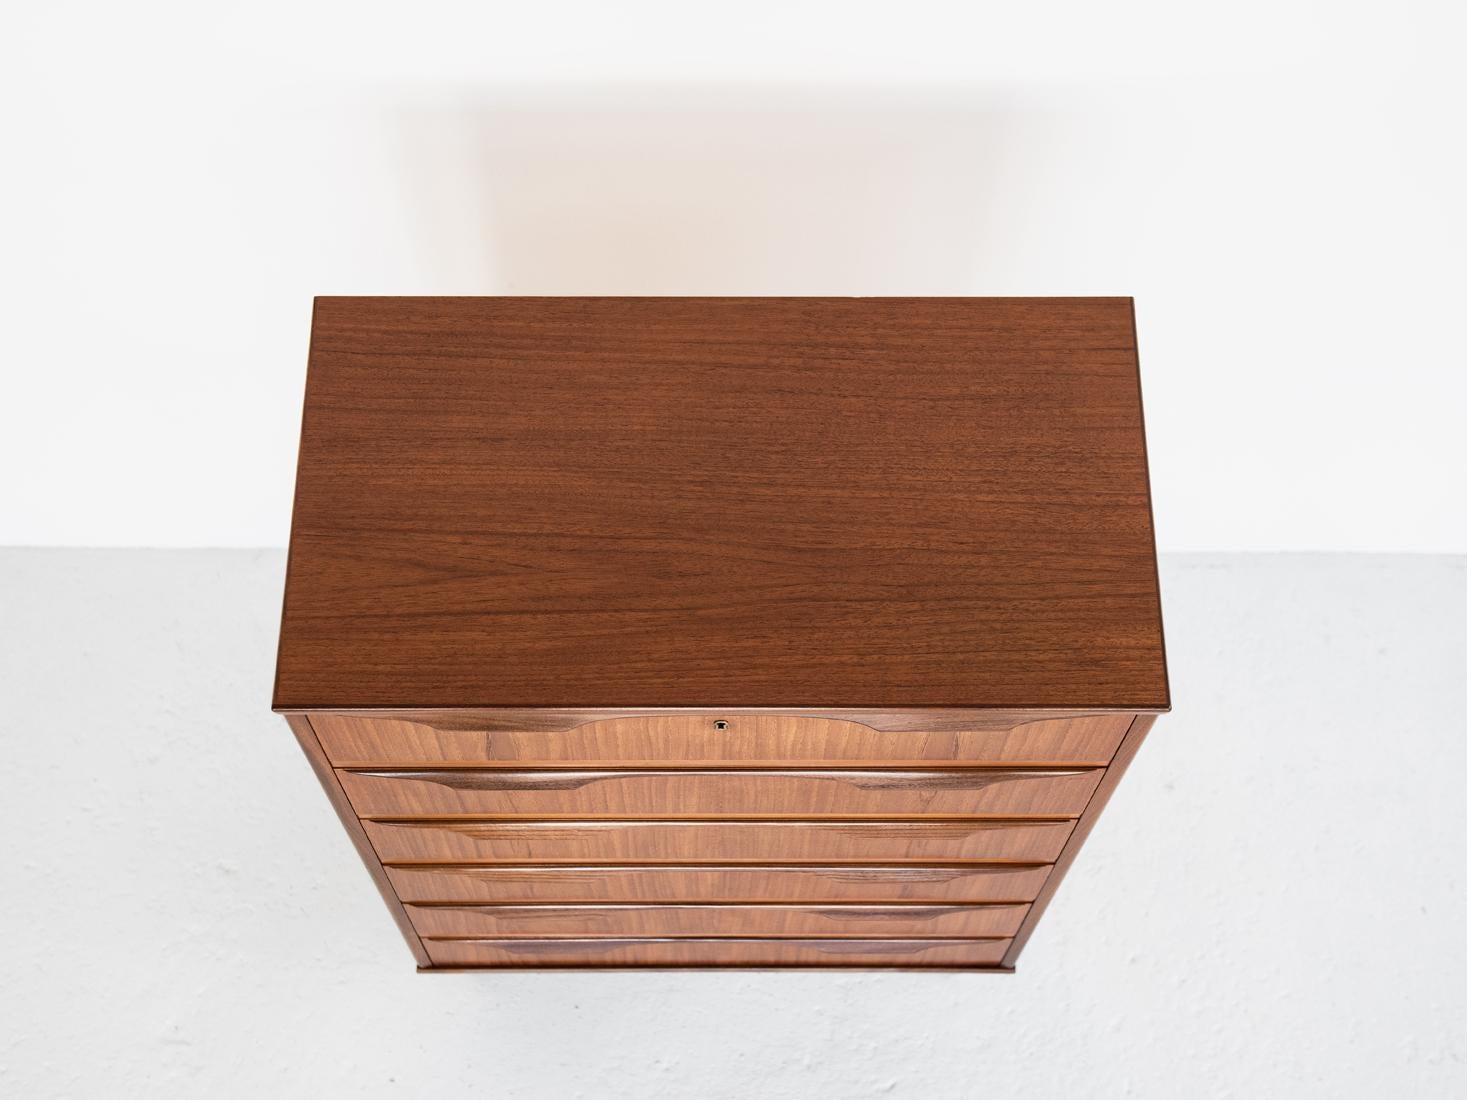 Midcentury Danish Chest of 6 Drawers in Teak by Klaus Okholm, 1960s For Sale 3